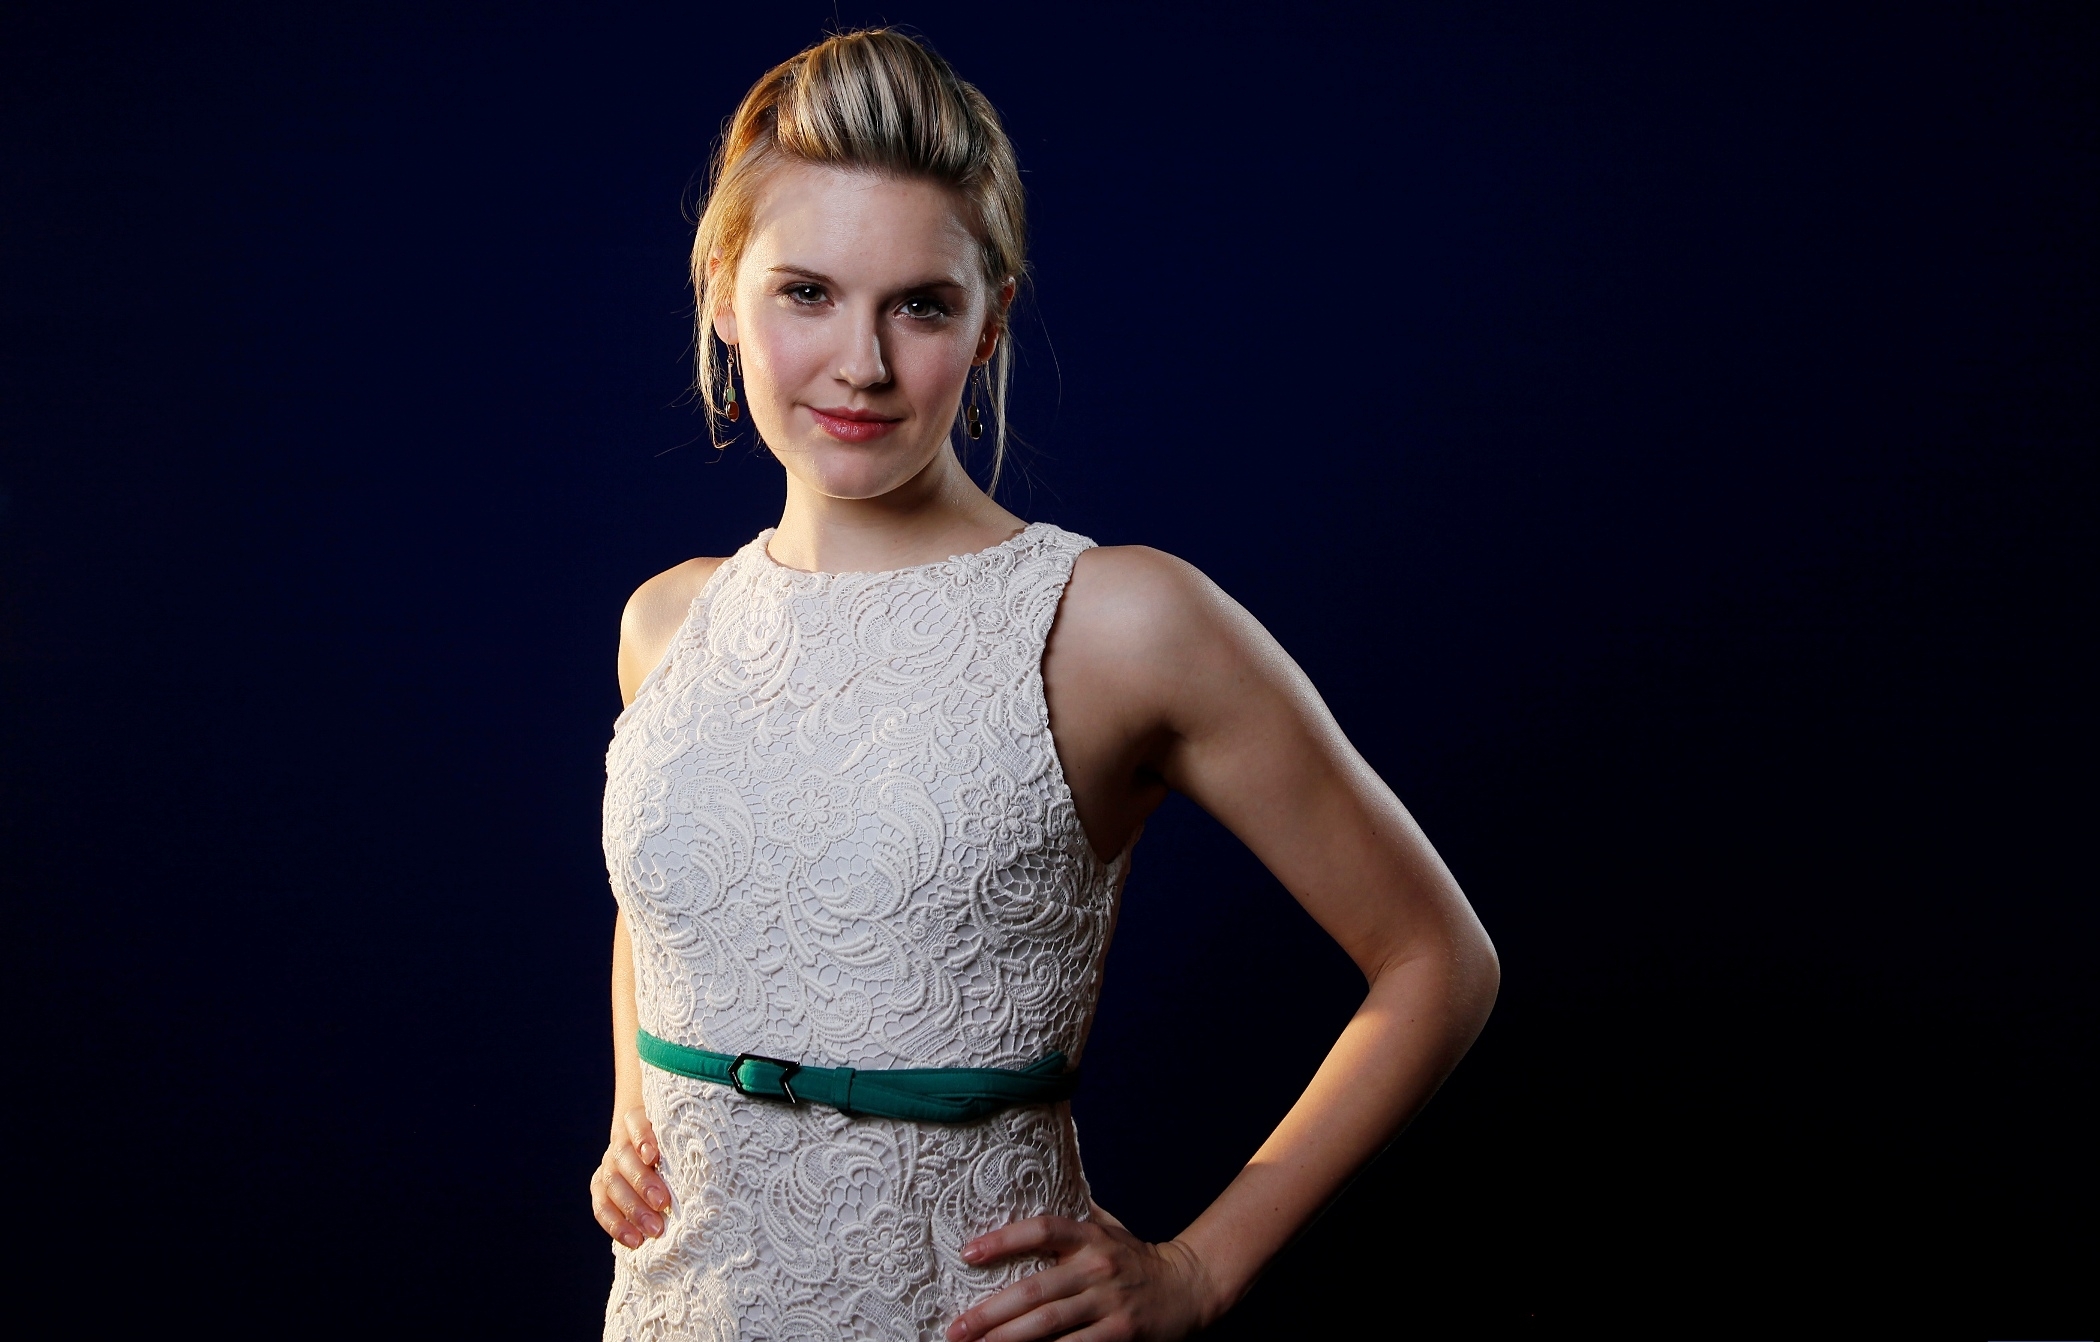 Maggie Grace Wallpapers Pictures Images HD Wallpapers Download Free Images Wallpaper [wallpaper981.blogspot.com]